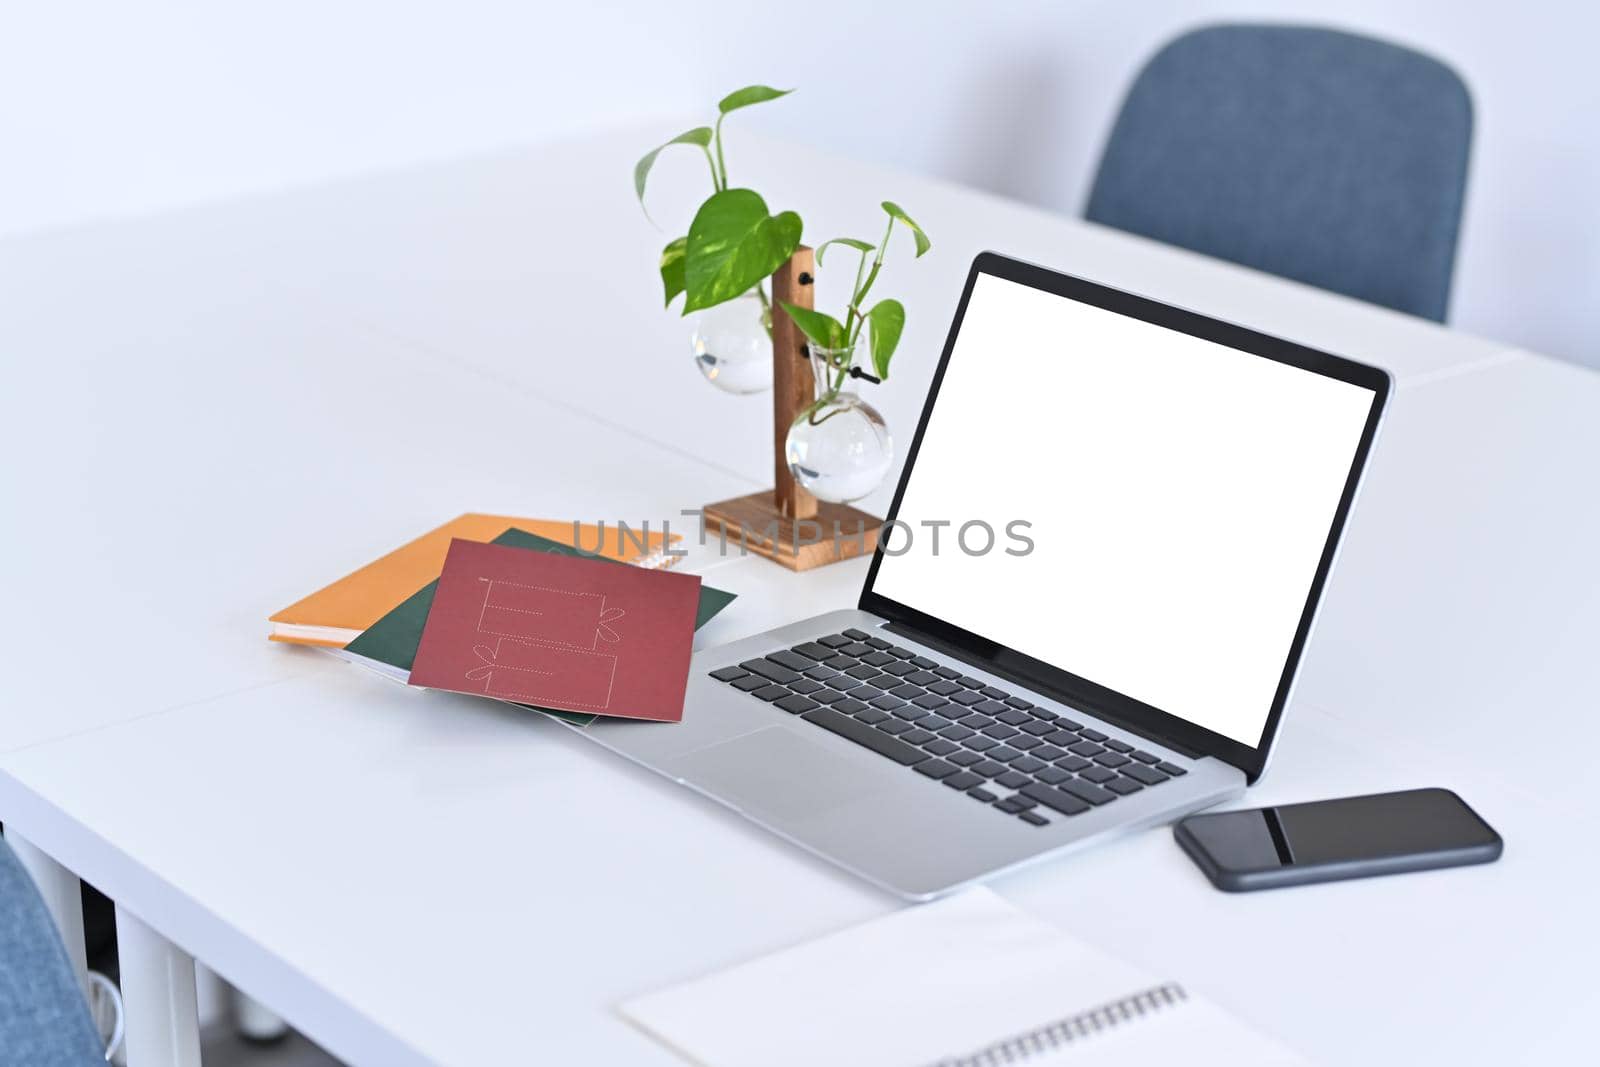 Computer laptop with empty display, smart phone, books and houseplant on white table. by prathanchorruangsak